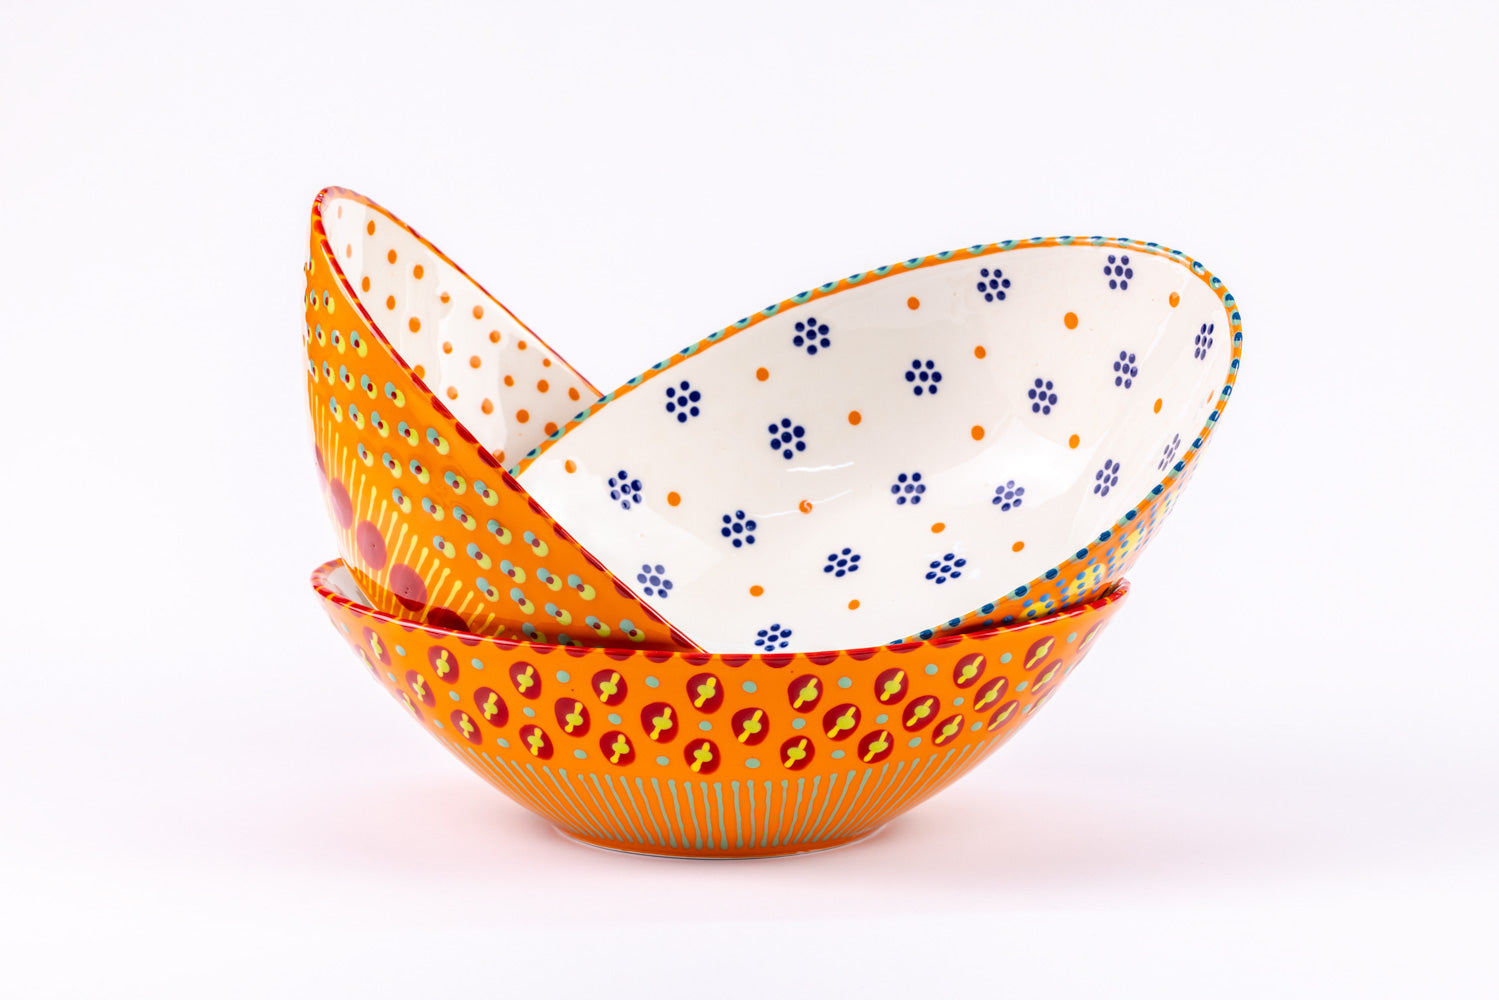 3 ceramic stacked oval serving bowls with Orange base color with dots & stripes on top in colors of red, yellow, orange, & green. Inside of one bowl is sweetly painted with blue 'dot' flowers and orange dots.